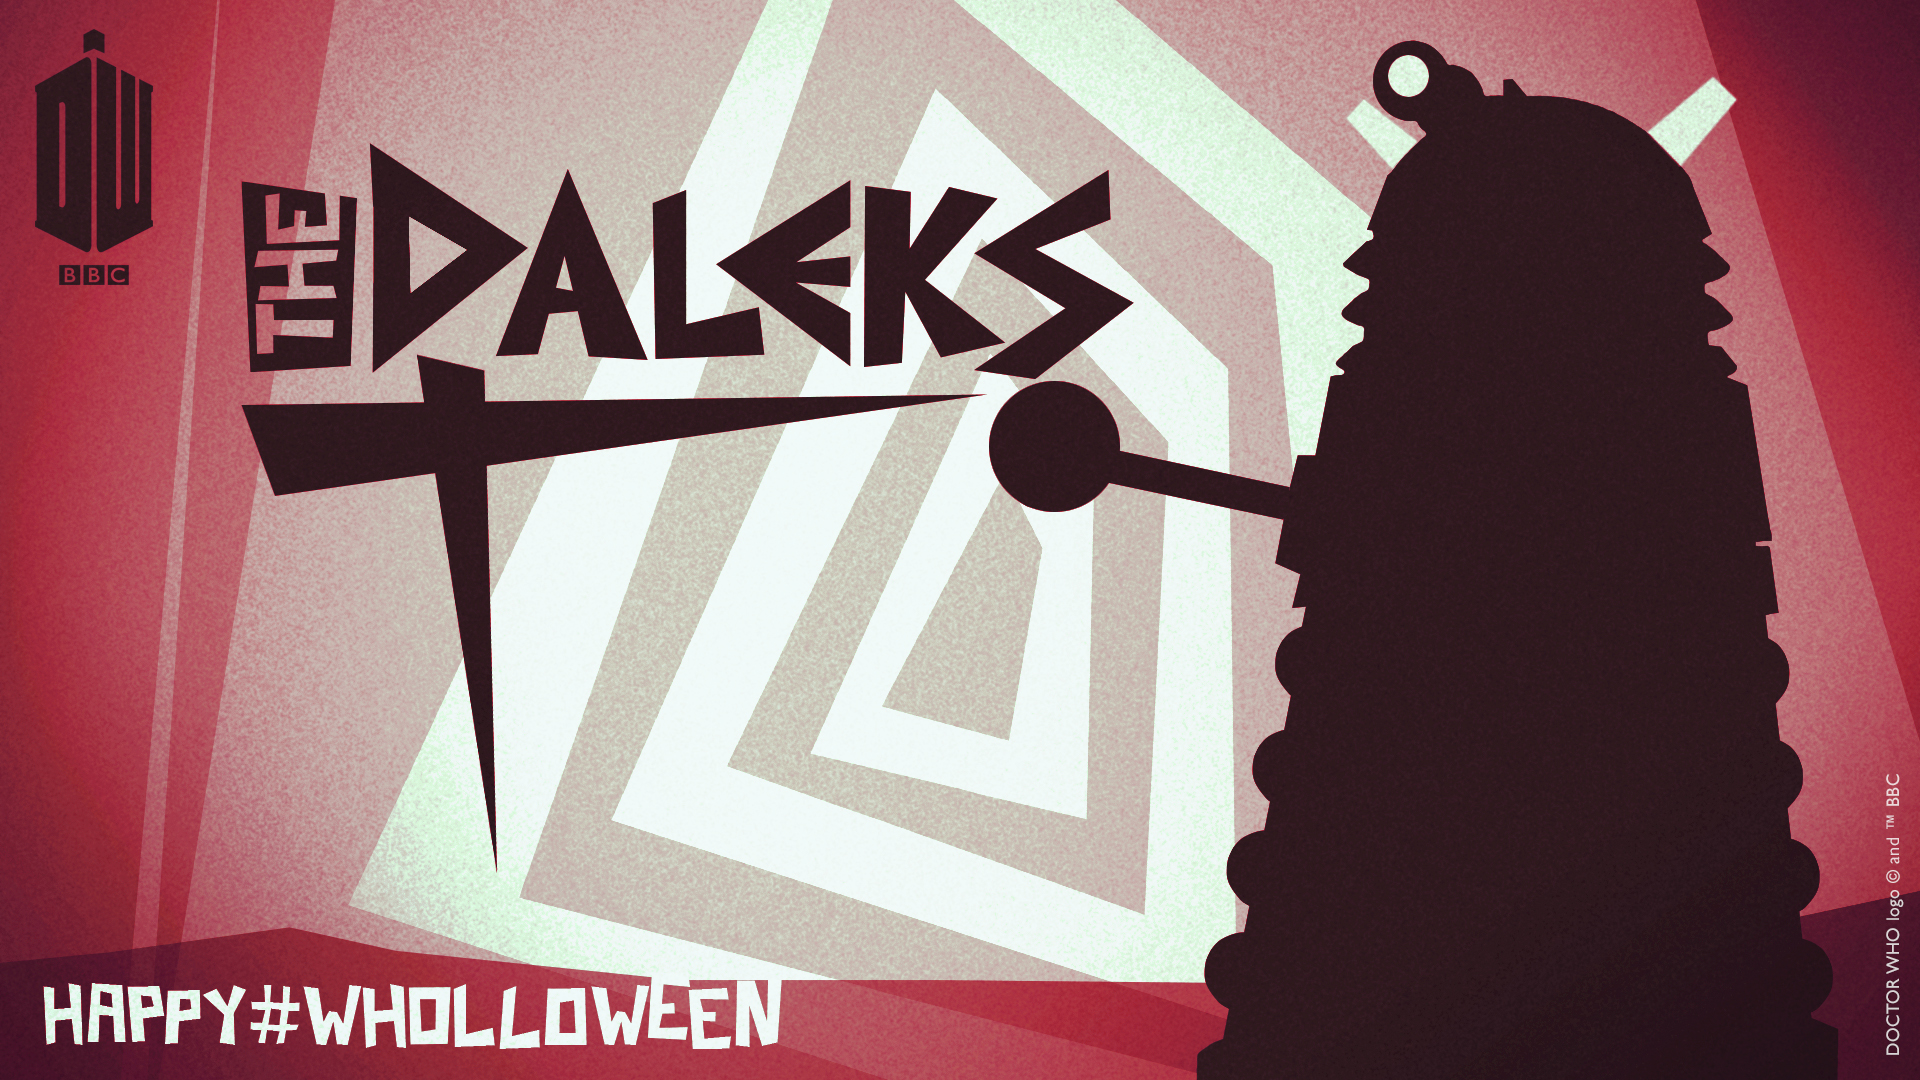 Wholloween Wallpaper Extras Doctor Who Bbc America